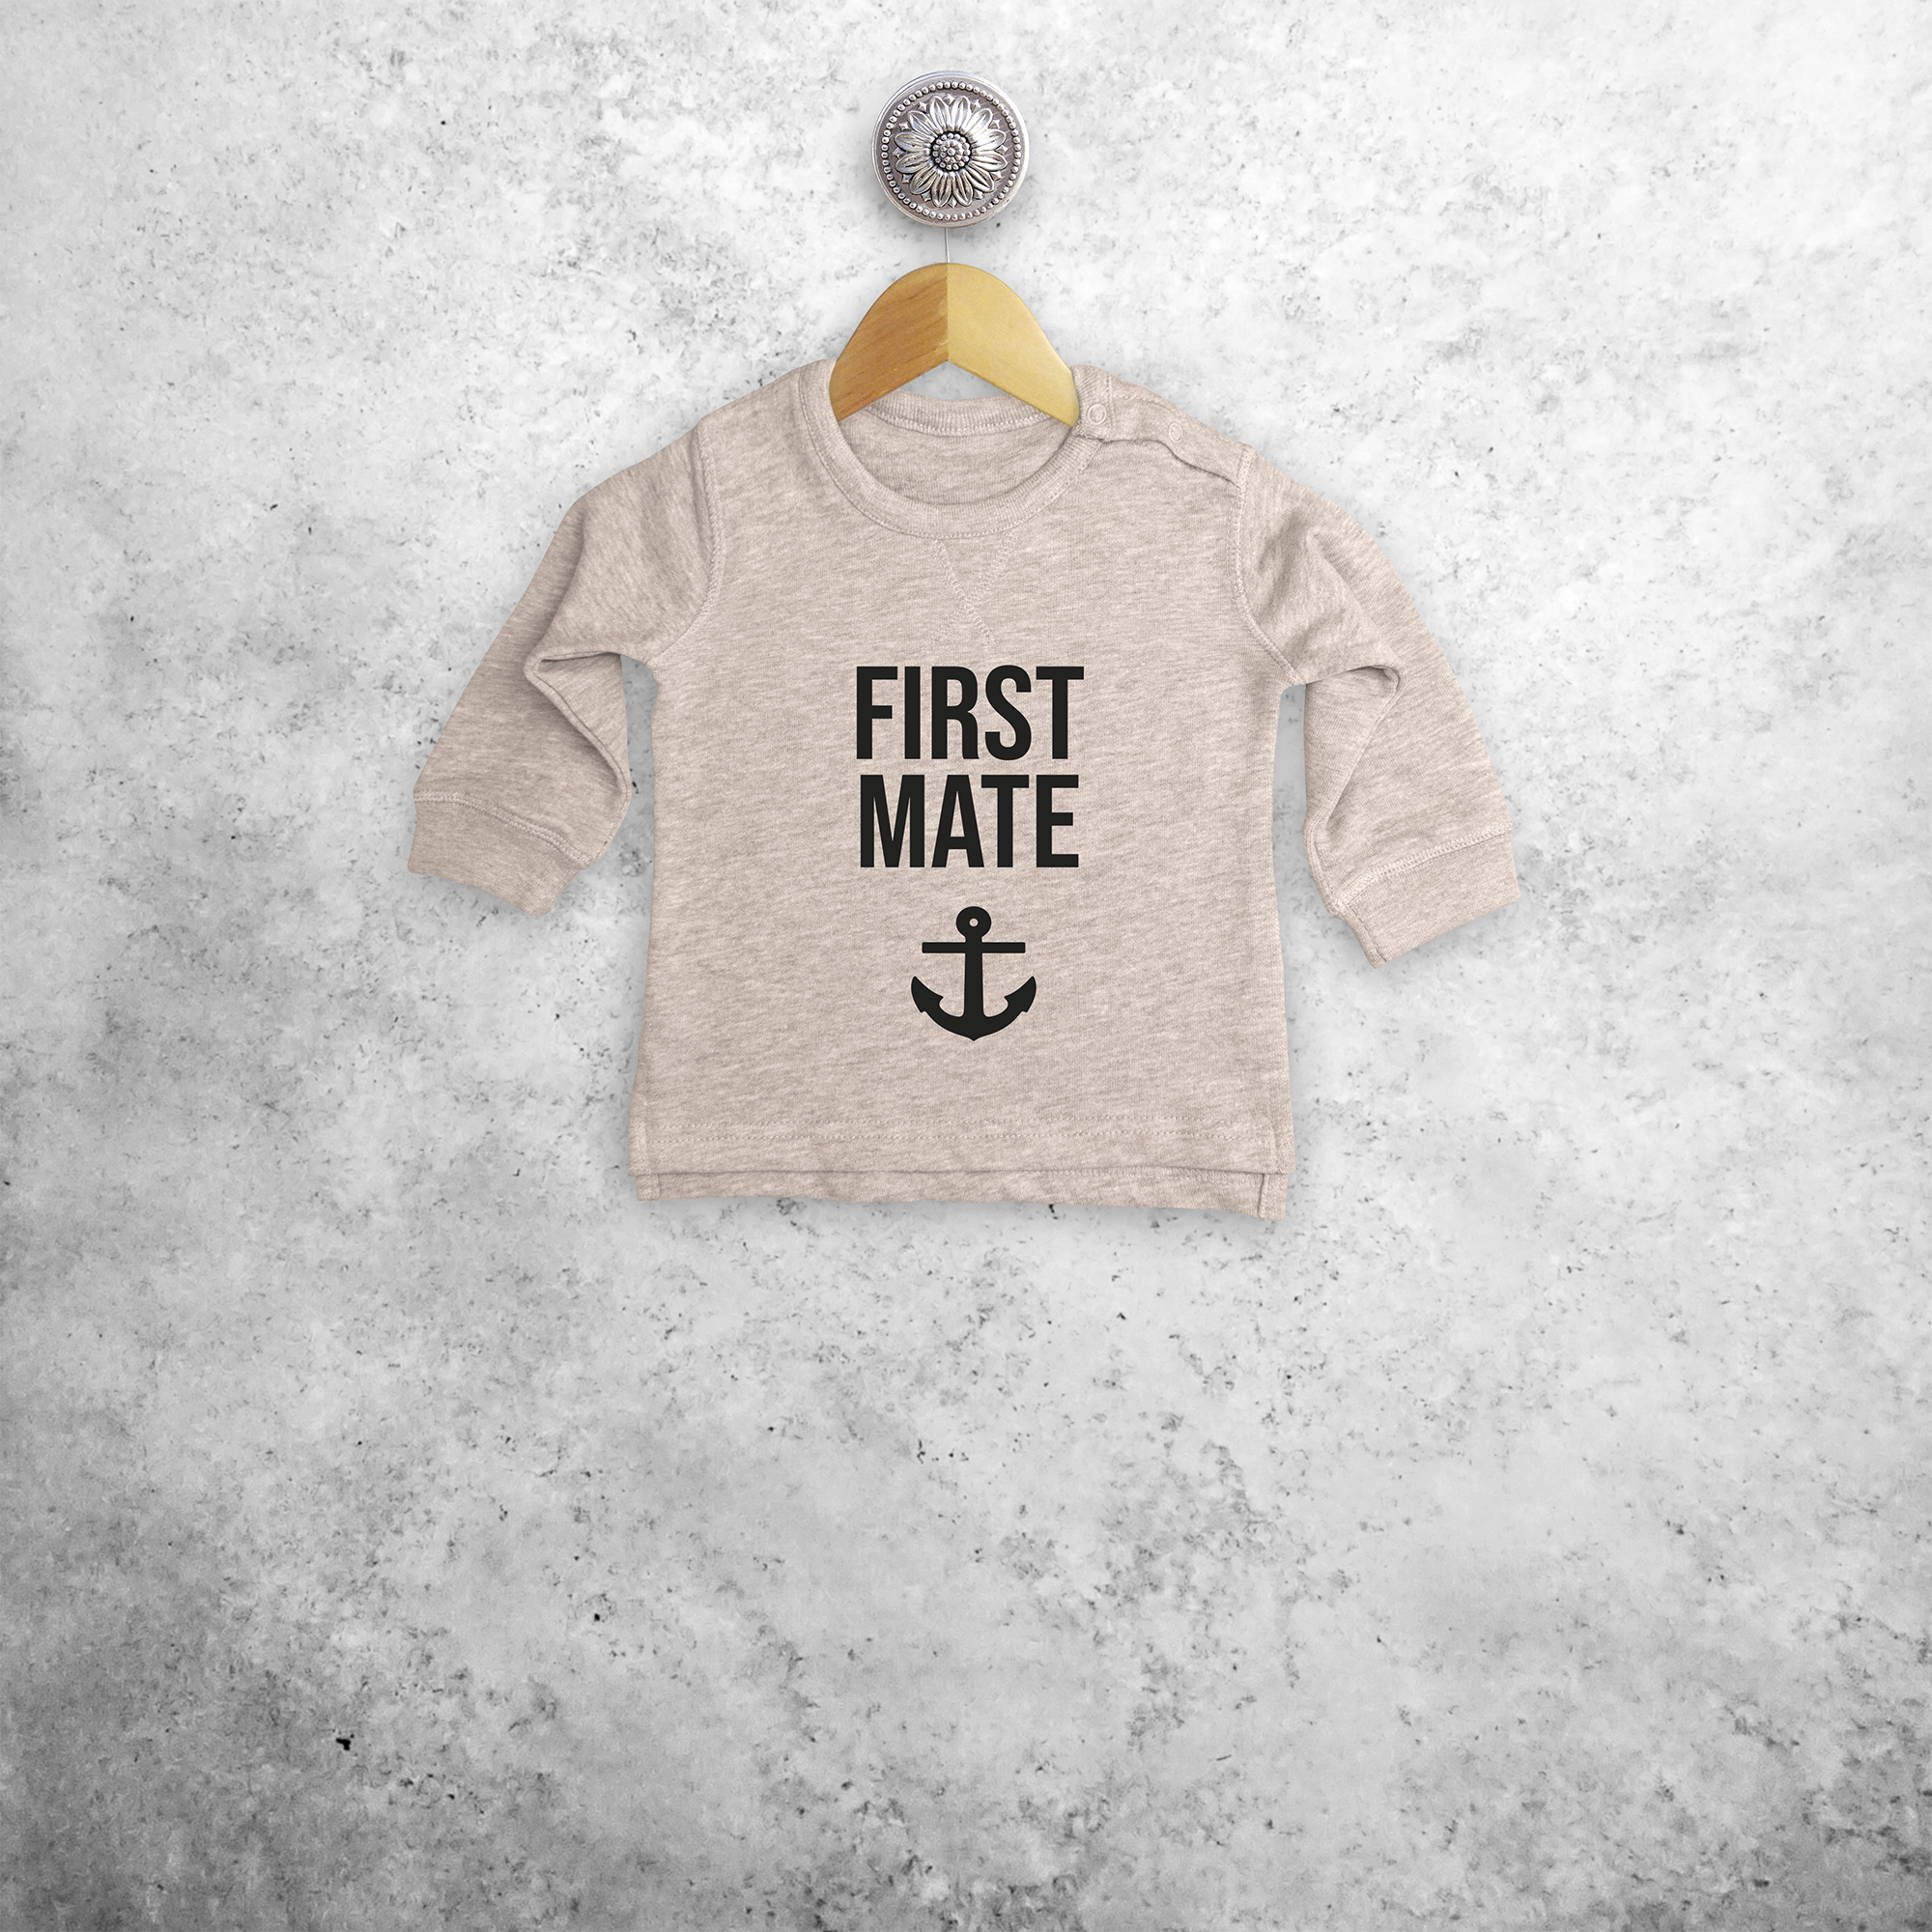 'First mate' baby trui